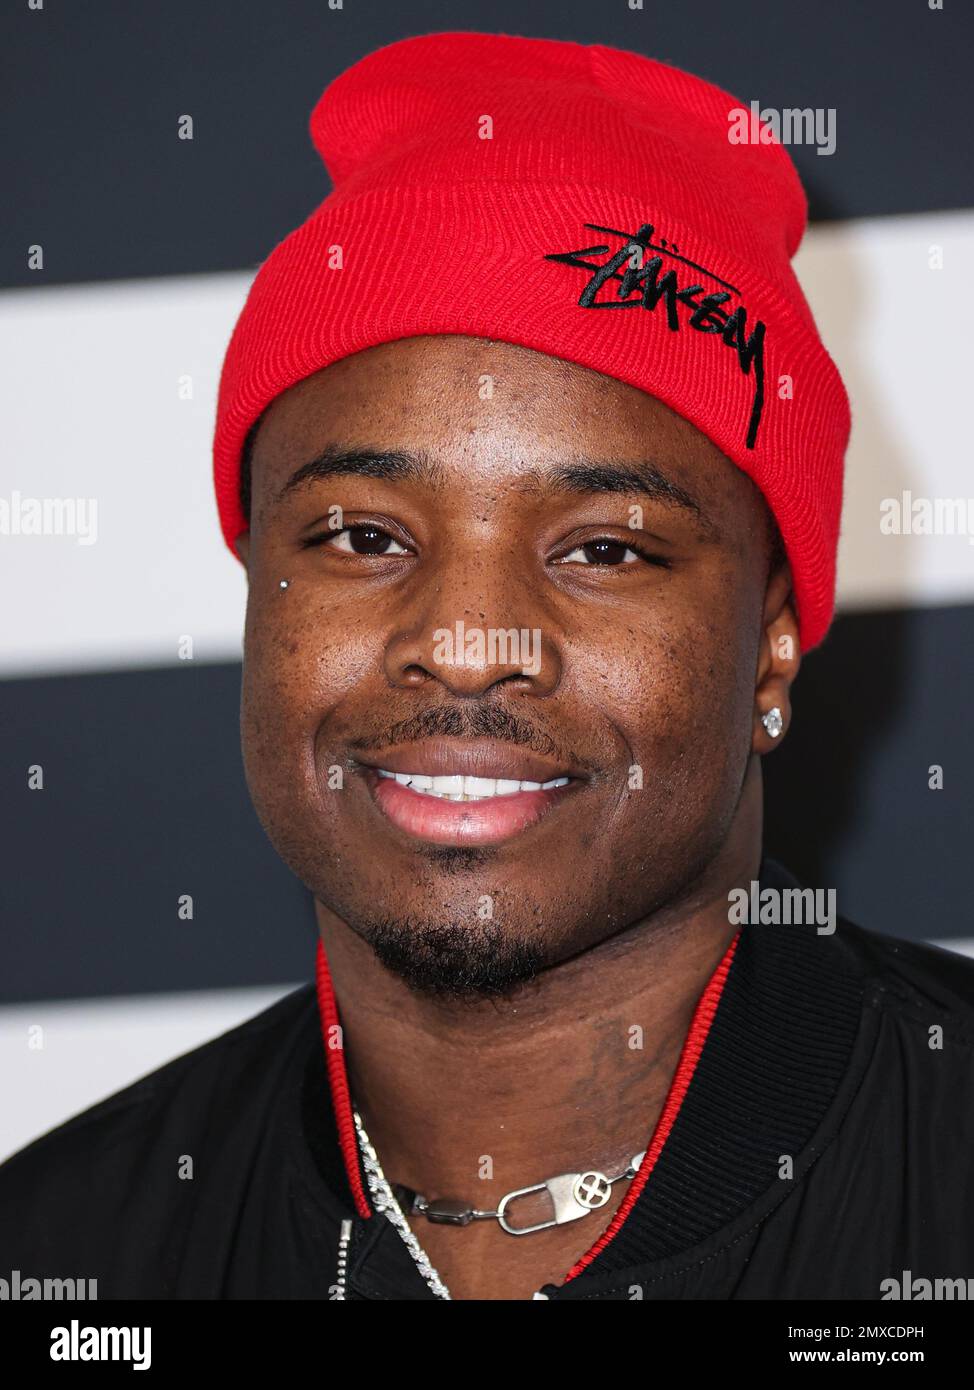 HOLLYWOOD, LOS ANGELES, CALIFORNIA, USA - FEBRUARY 02: IDK arrives at the Warner Music Group Pre-Grammy Party 2023 held at the Hollywood Athletic Club on February 2, 2023 in Hollywood, Los Angeles, California, United States. (Photo by Xavier Collin/Image Press Agency) Stock Photo